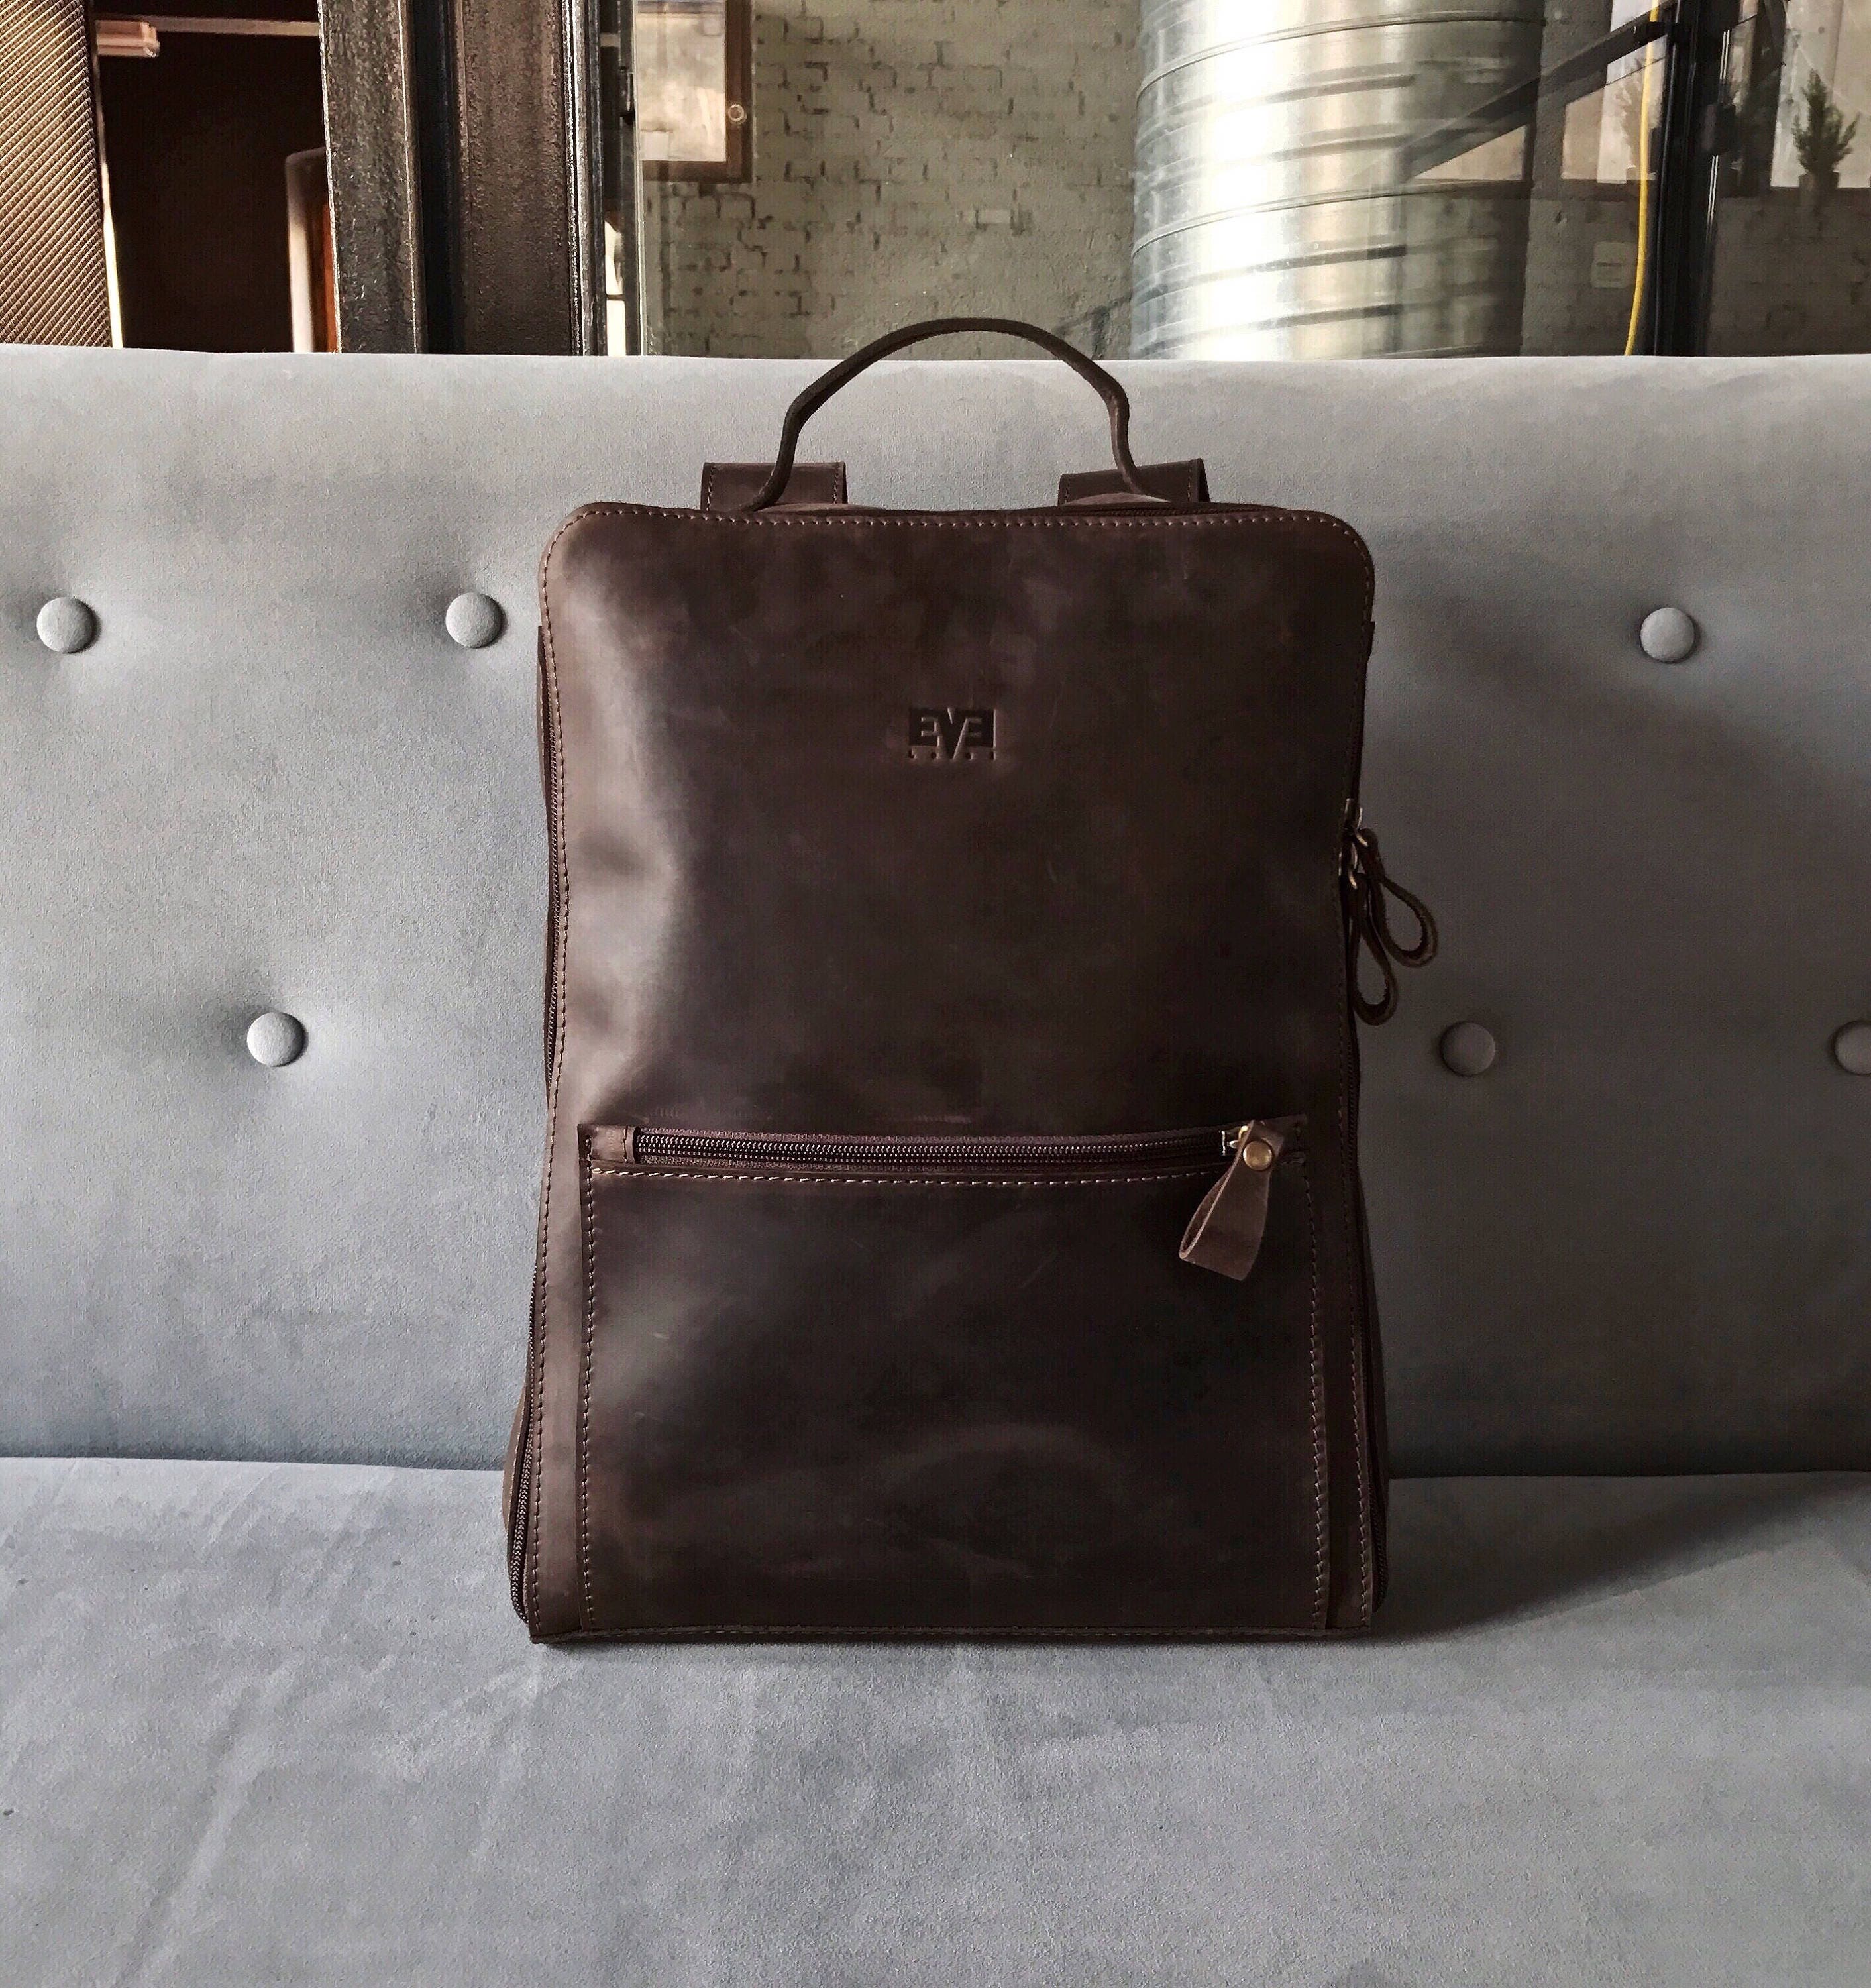 Handmade Leather Backpack/Citi Backpack Handcrafted Leather Rucksack On Zipper Brown Bag